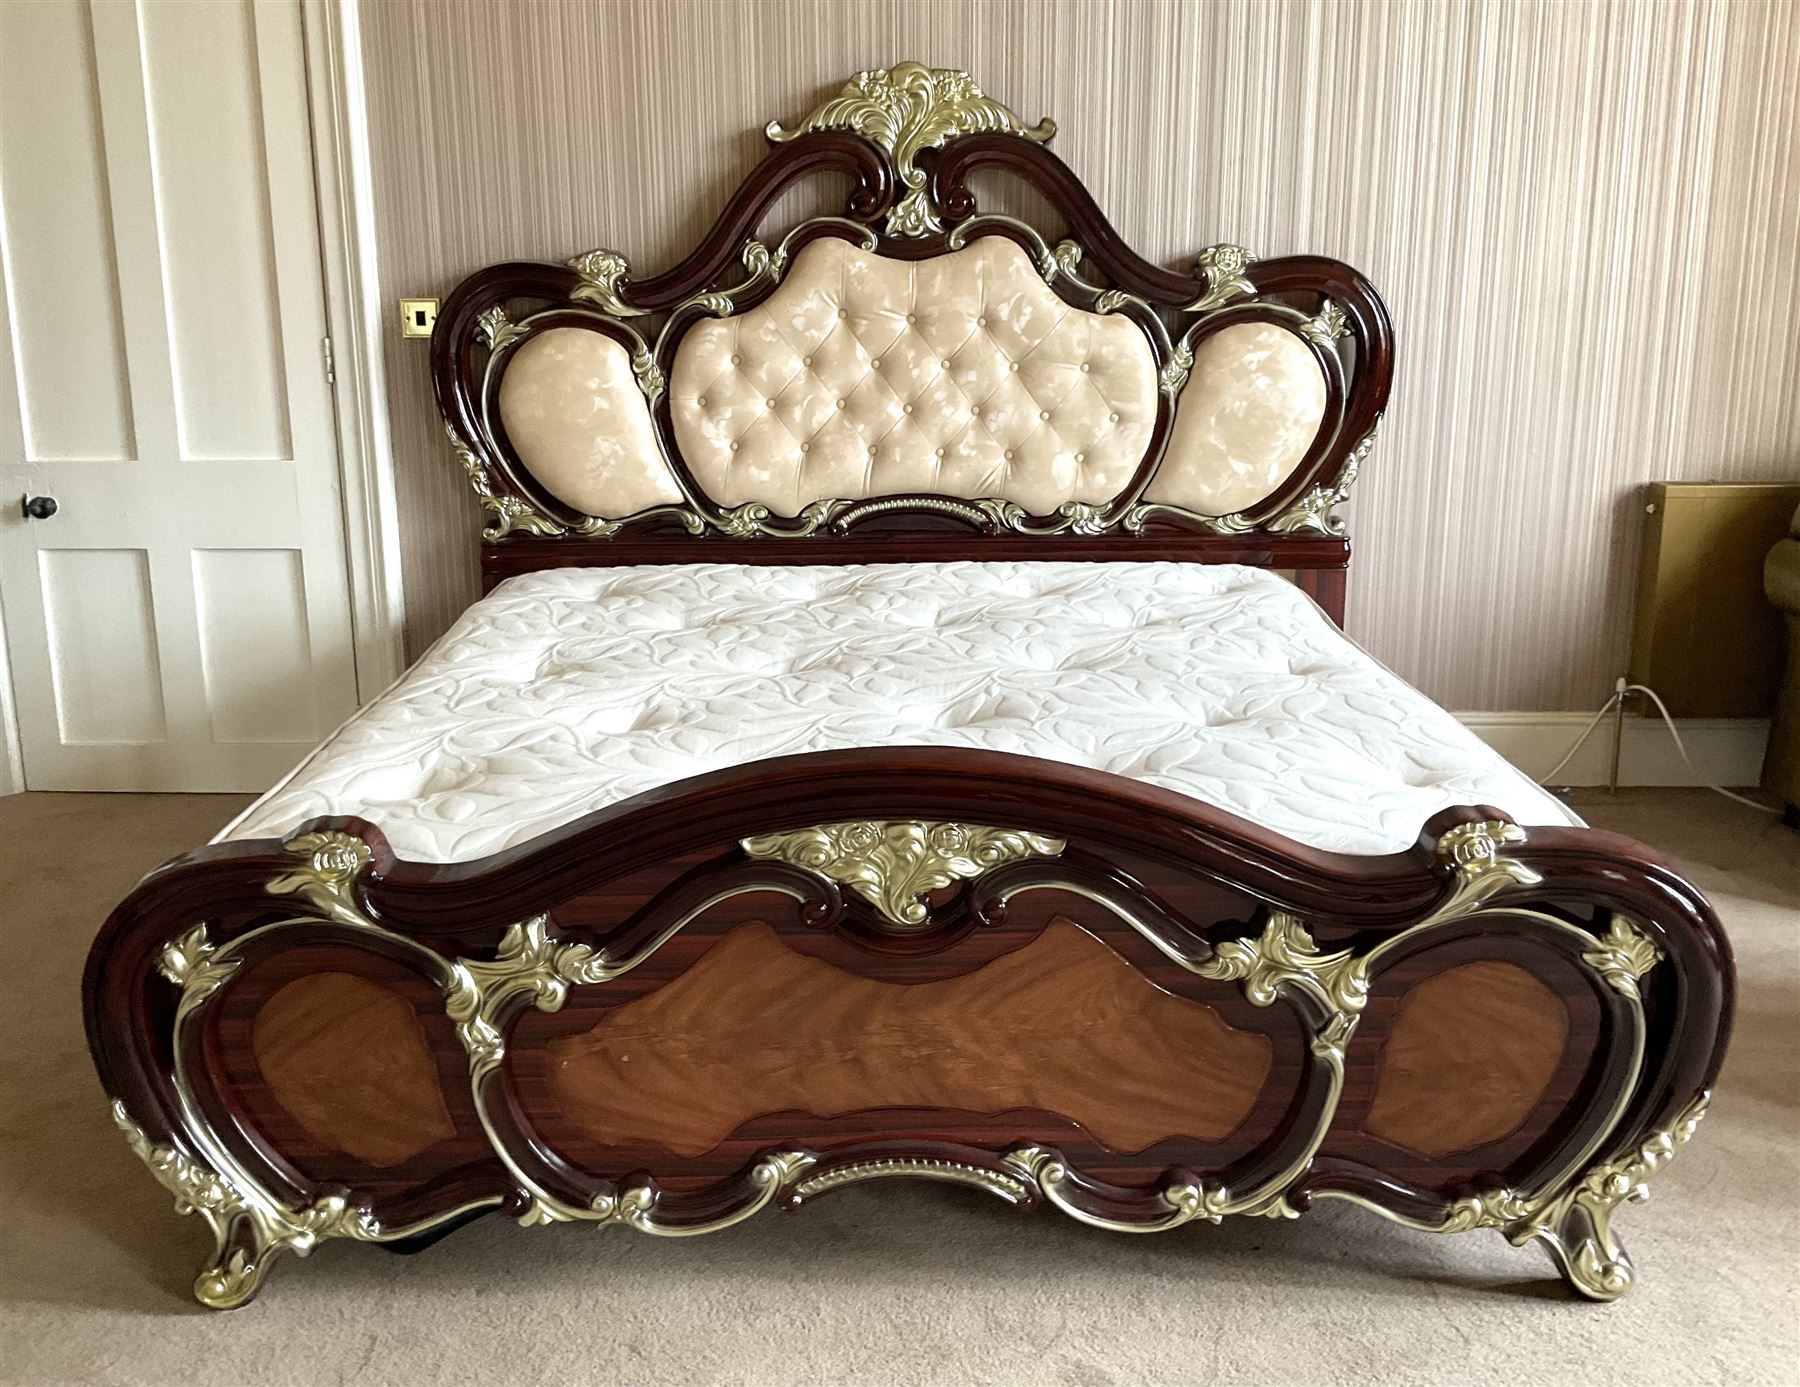 Rococo style 6' Super Kingsize bed